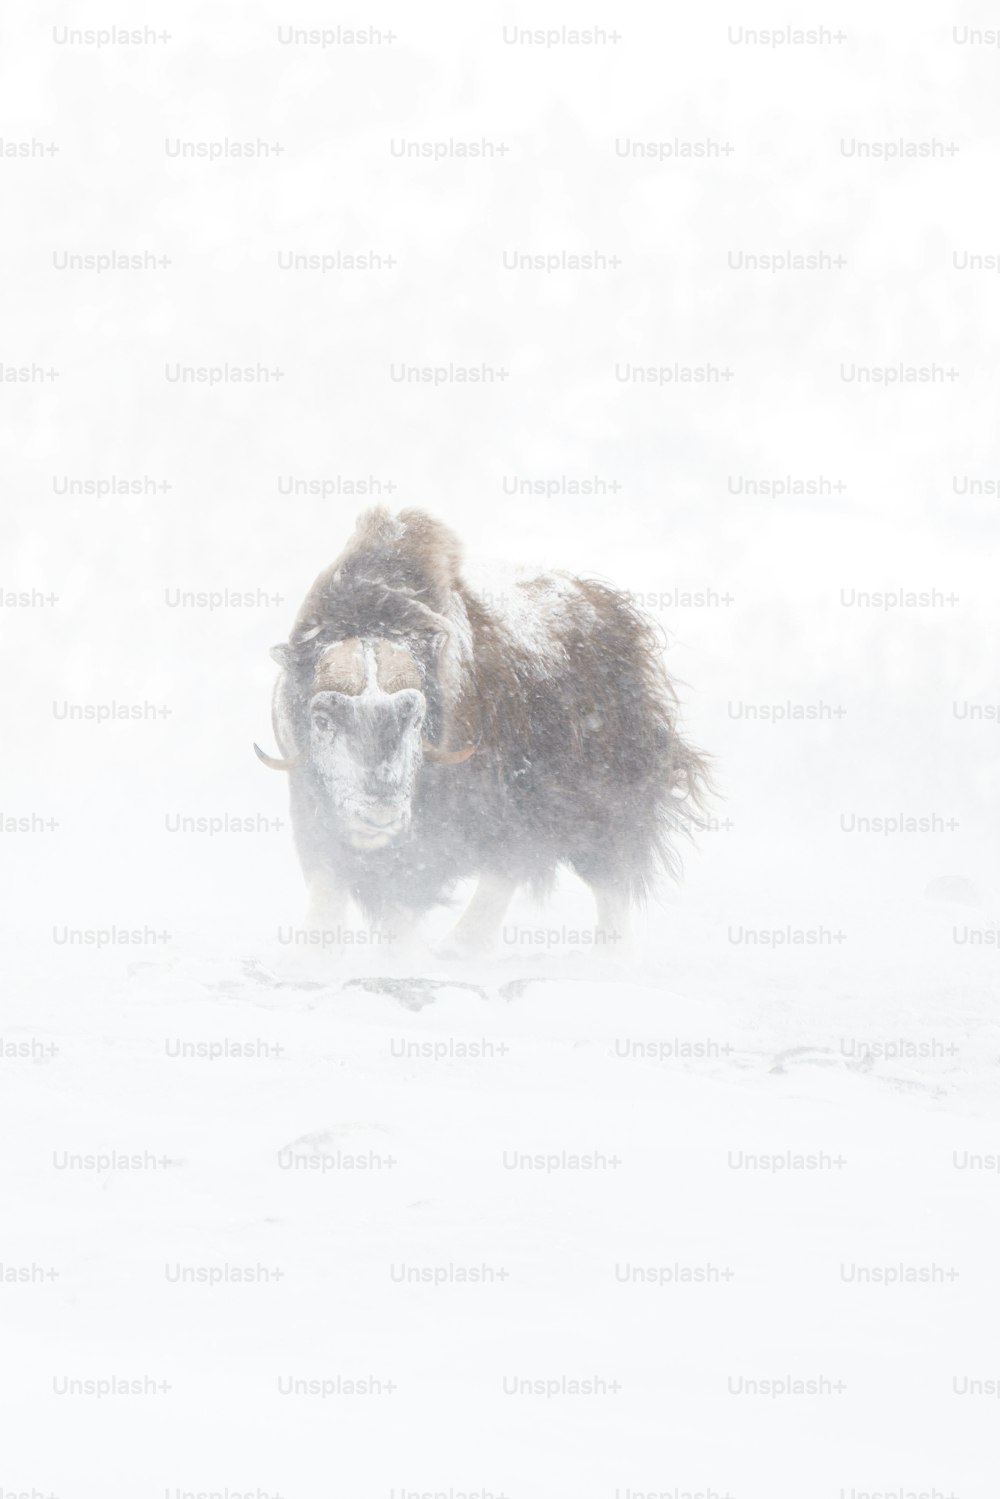 a bison running through the snow in a blizzard